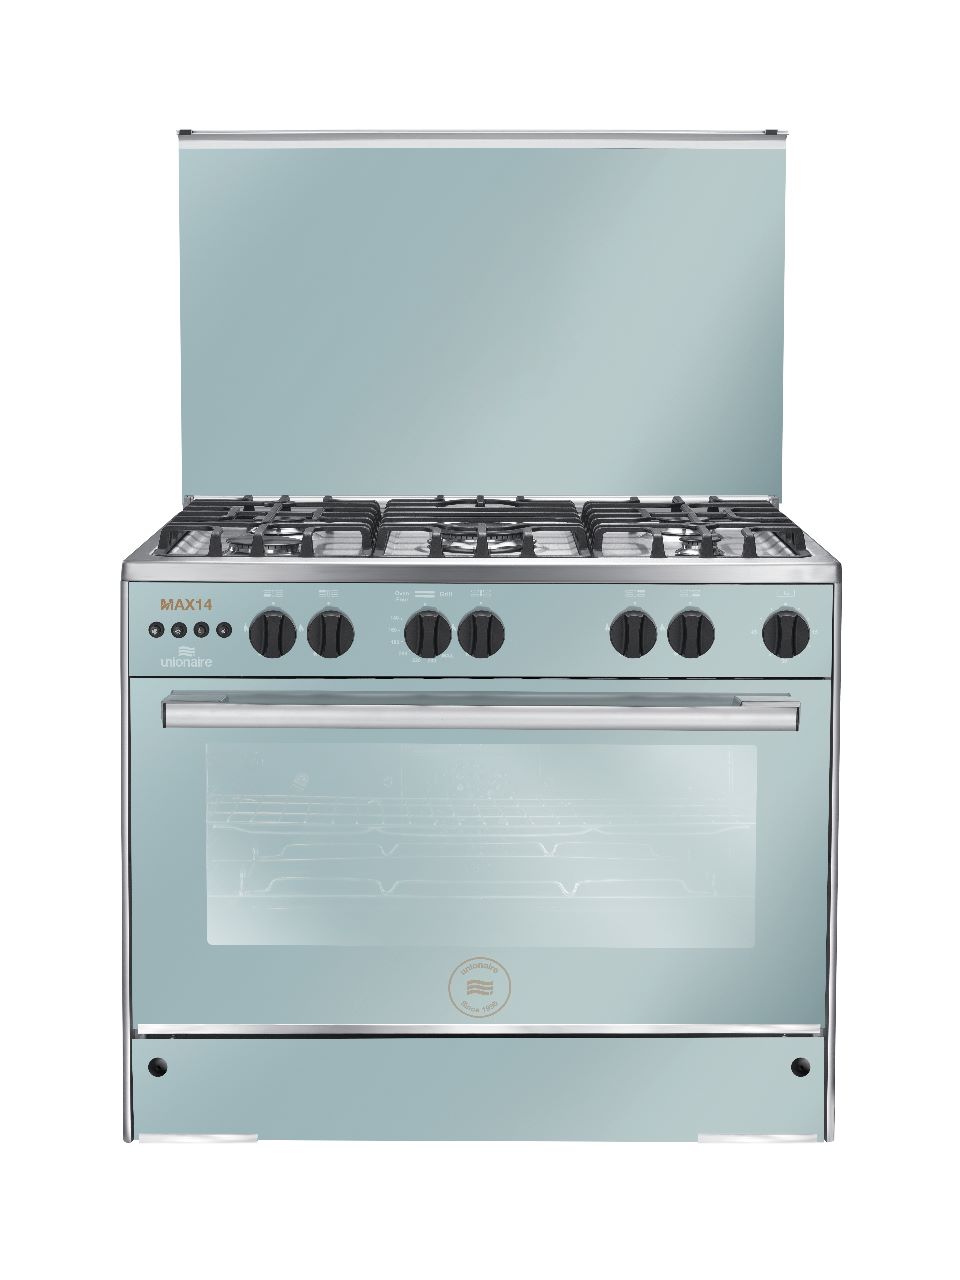 MAX 14 – Gas Cooker from Unionaire, 5 Burners – 60*90 